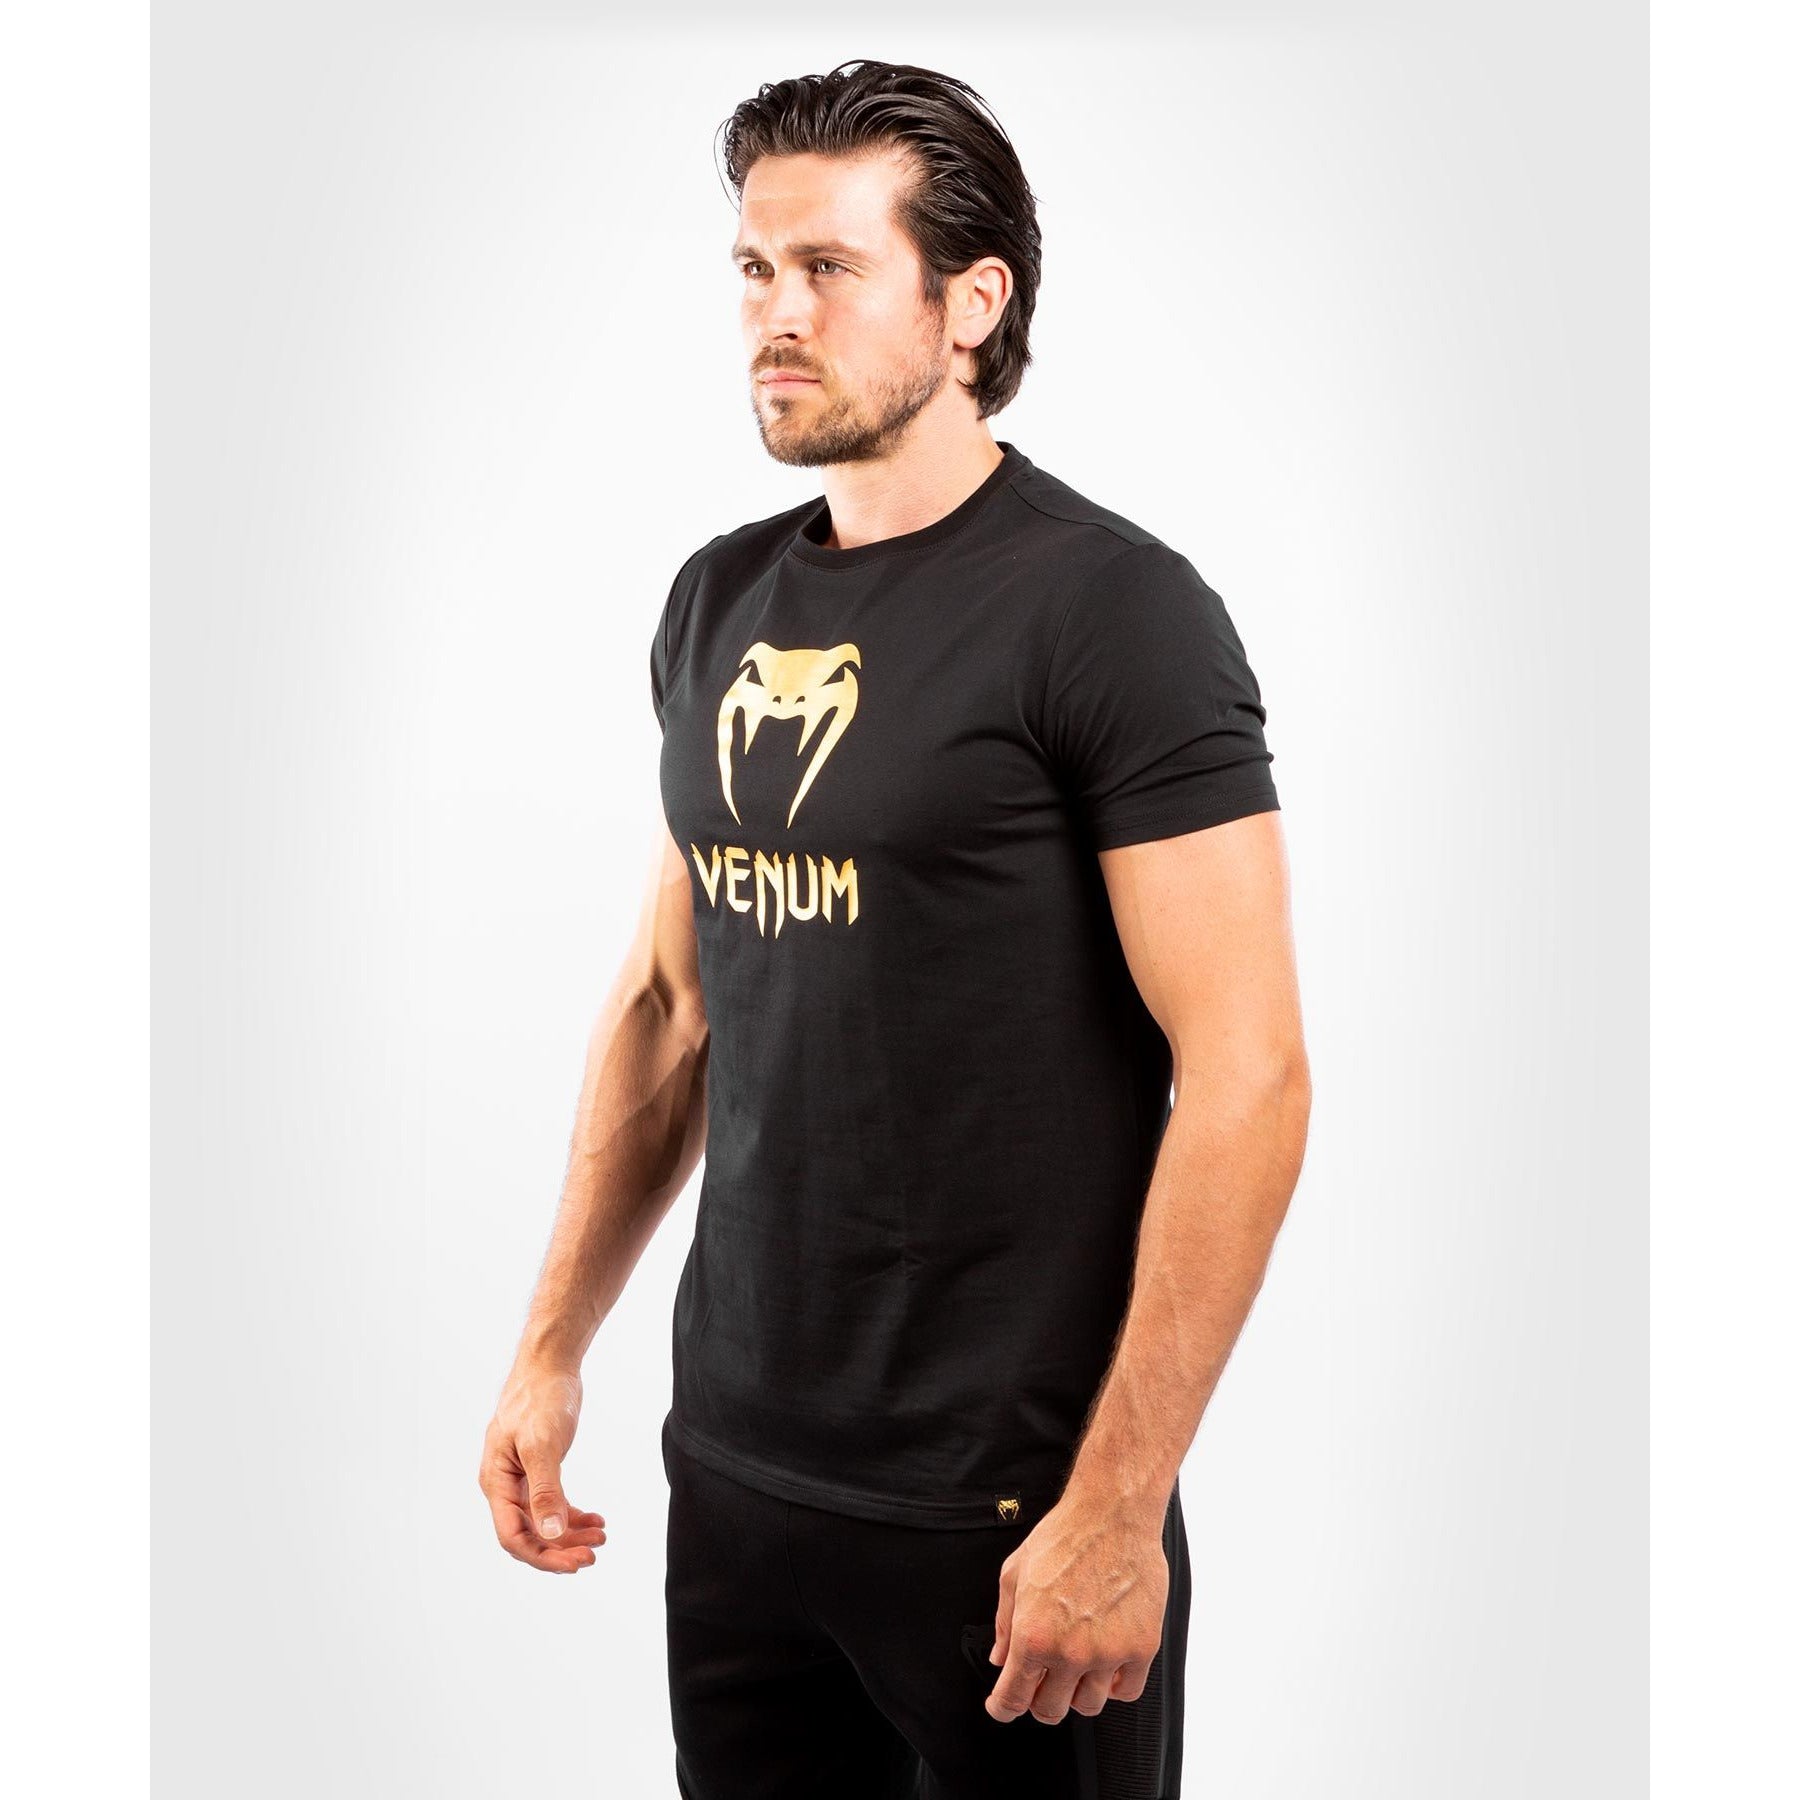 Side view of the crew neck black/gold Venum classic t shirt